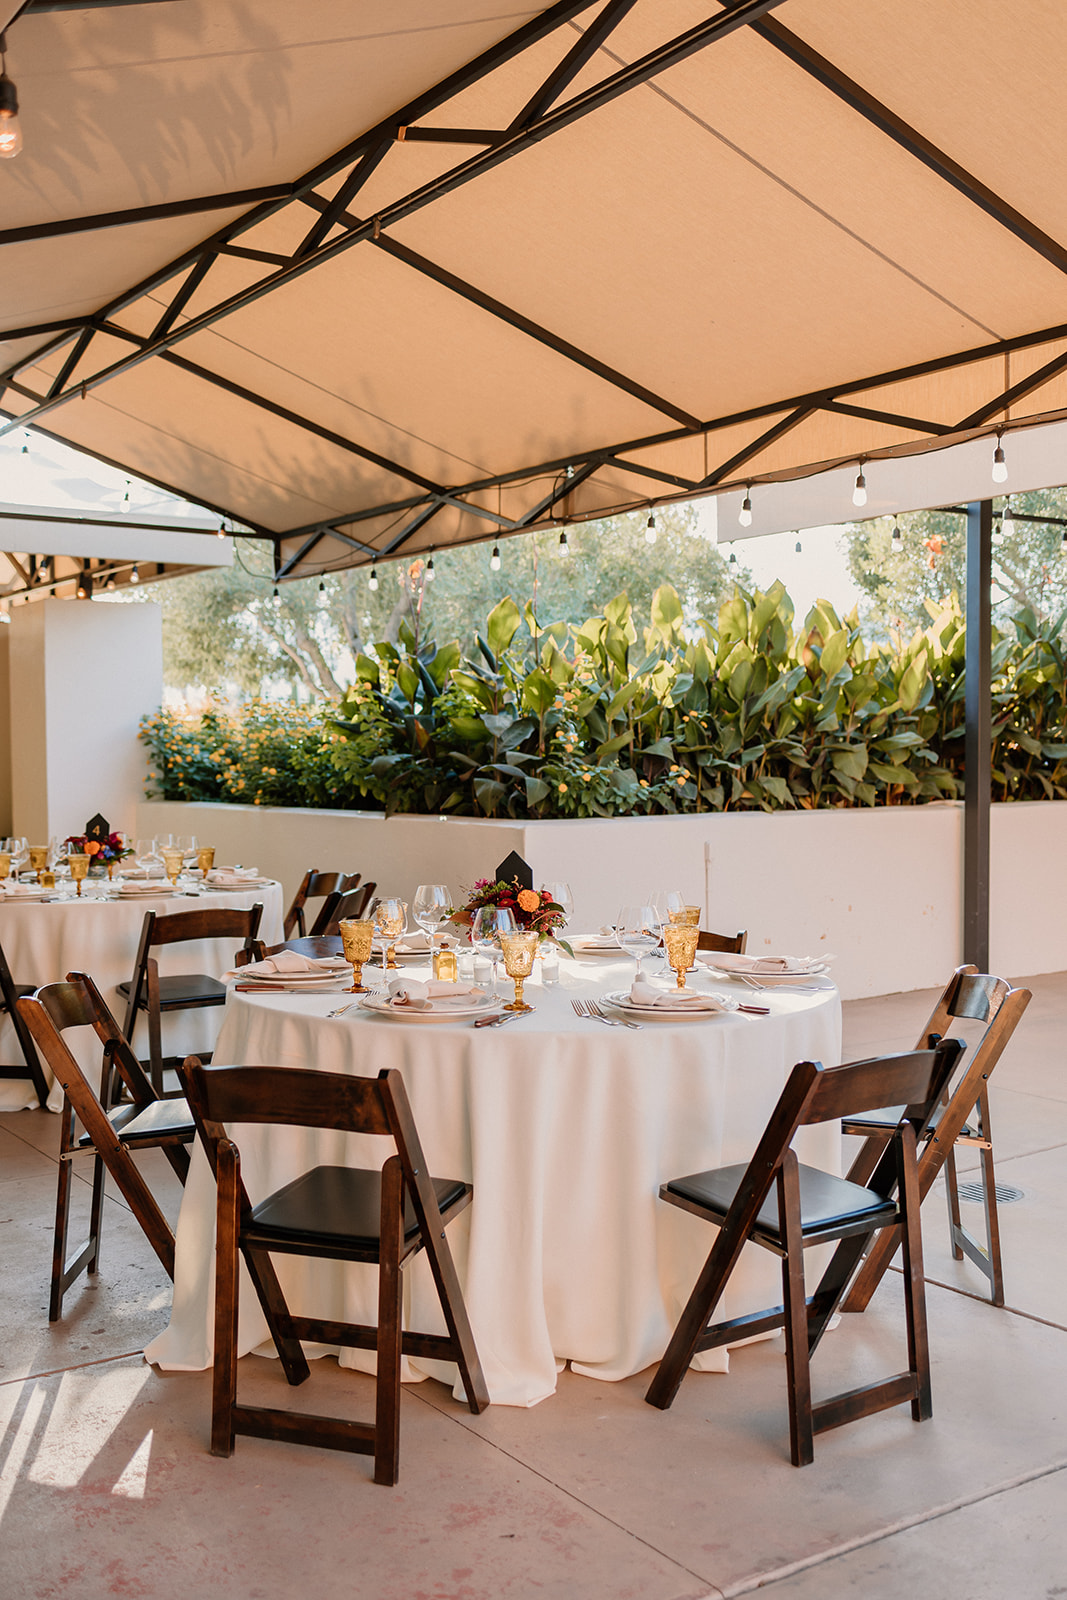 Outdoor dining setup under a canopy with elegantly set tables, wooden chairs, and lush greenery in the background at Tre Posti